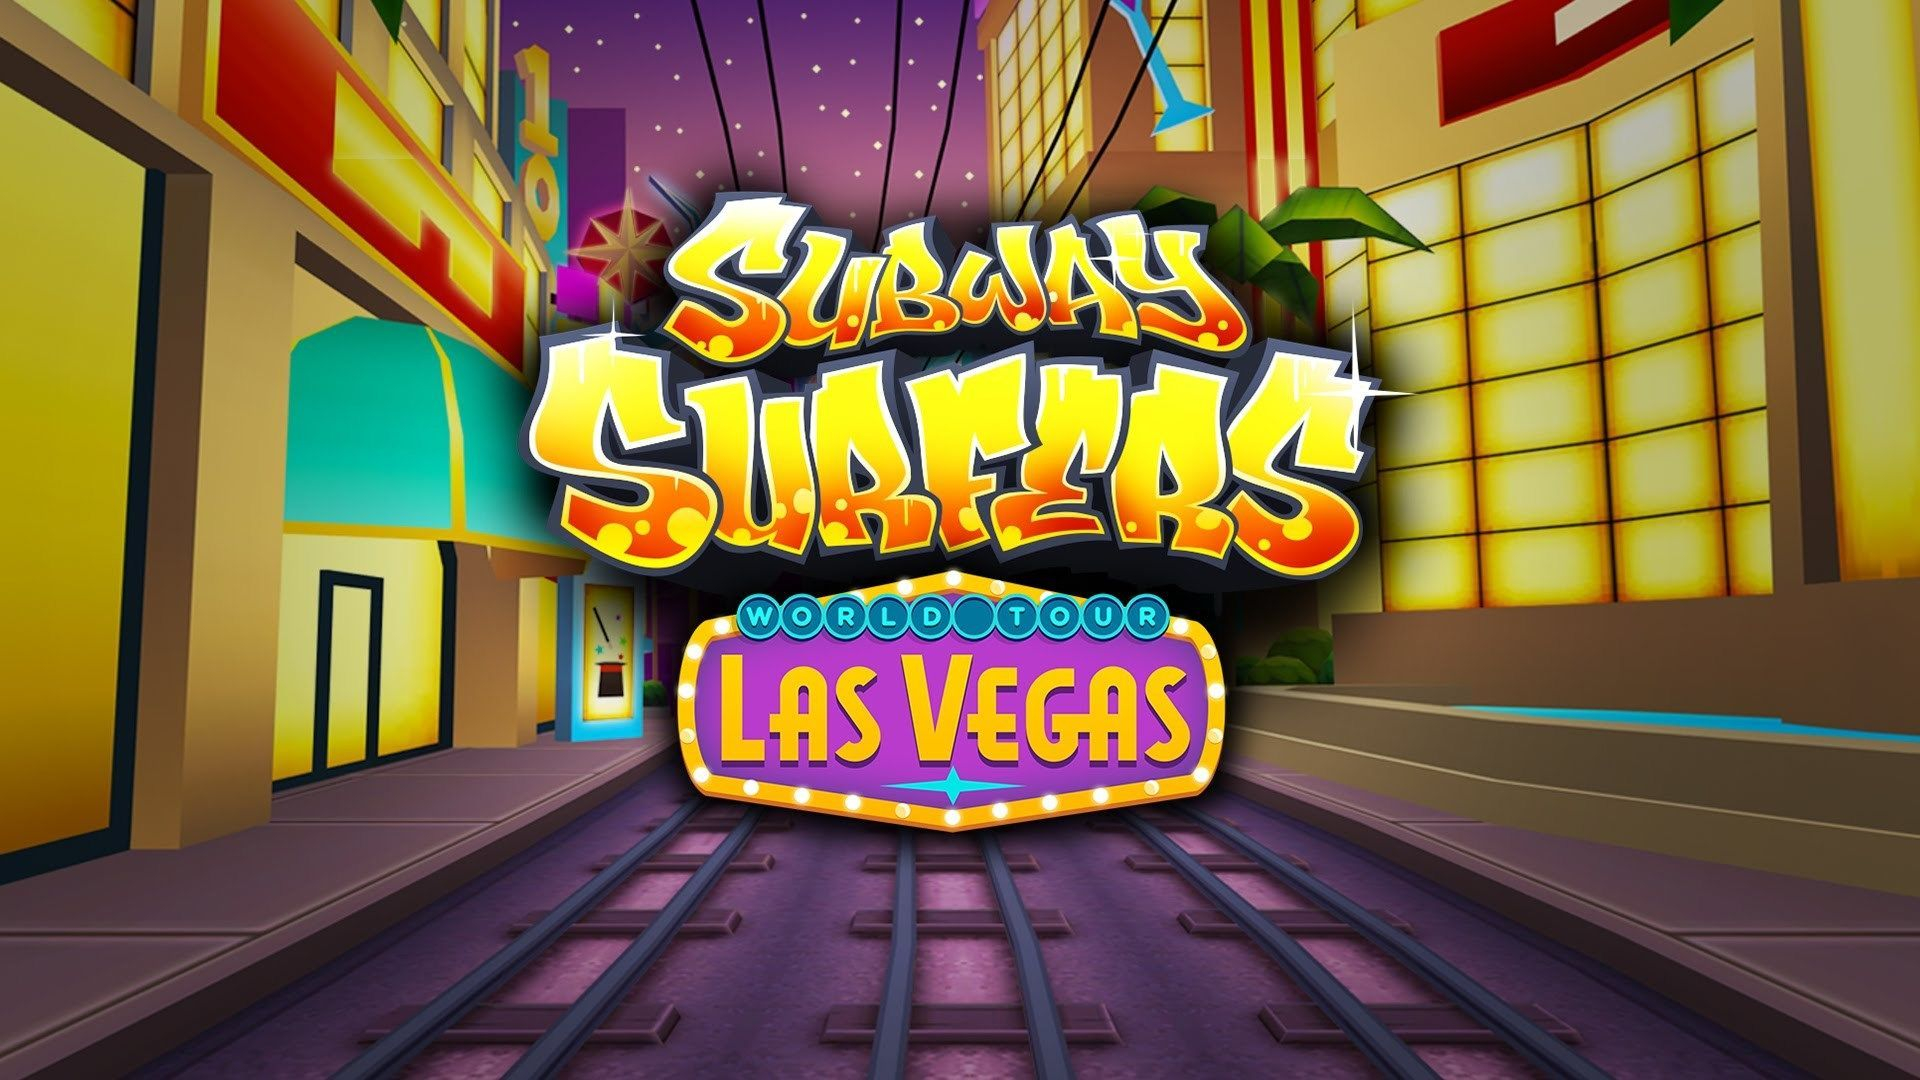 1920x1080 Subway Surfers Wallpapers Top Free Subway Surfers Backgrounds